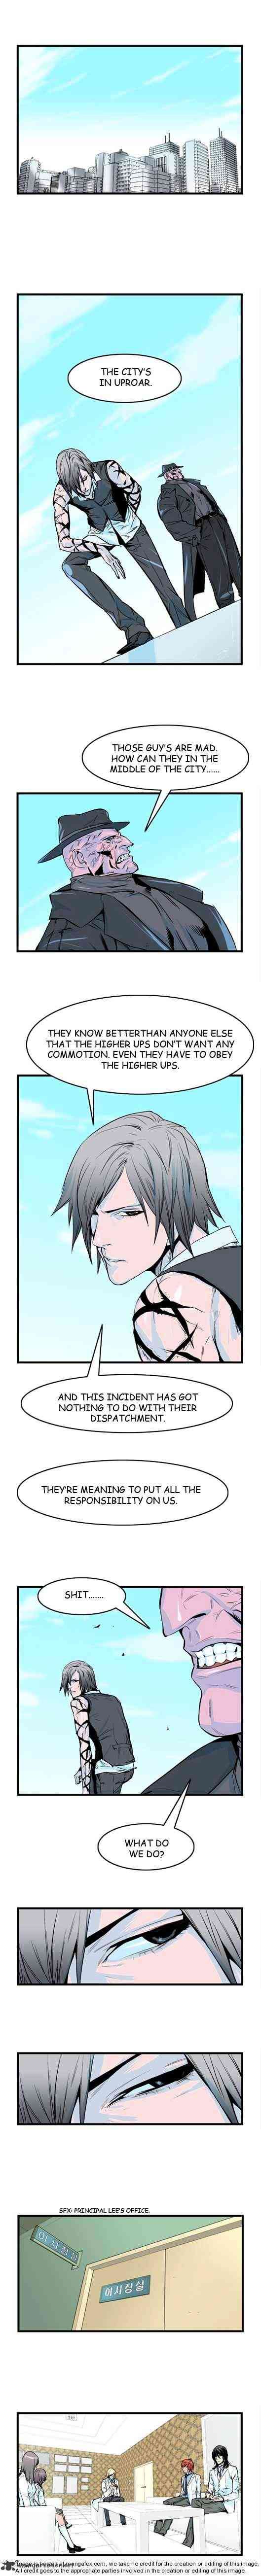 Noblesse Chapter 31 _ Chapters 31-45 page 58